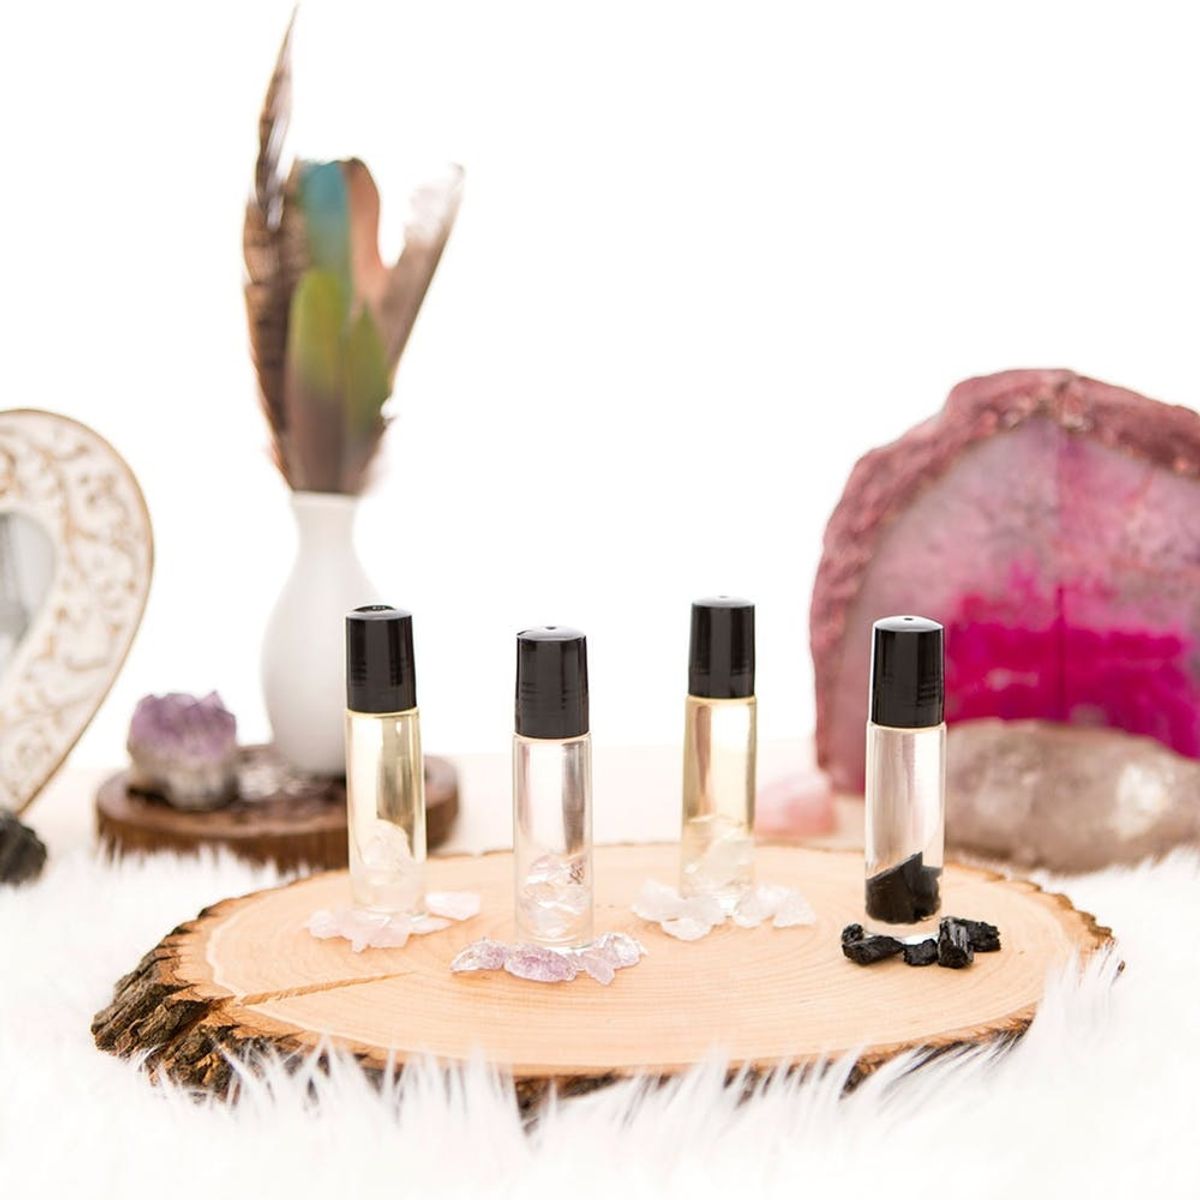 DIY These Sensual Scented Oil Perfumes With Crystals for You + Your Boo